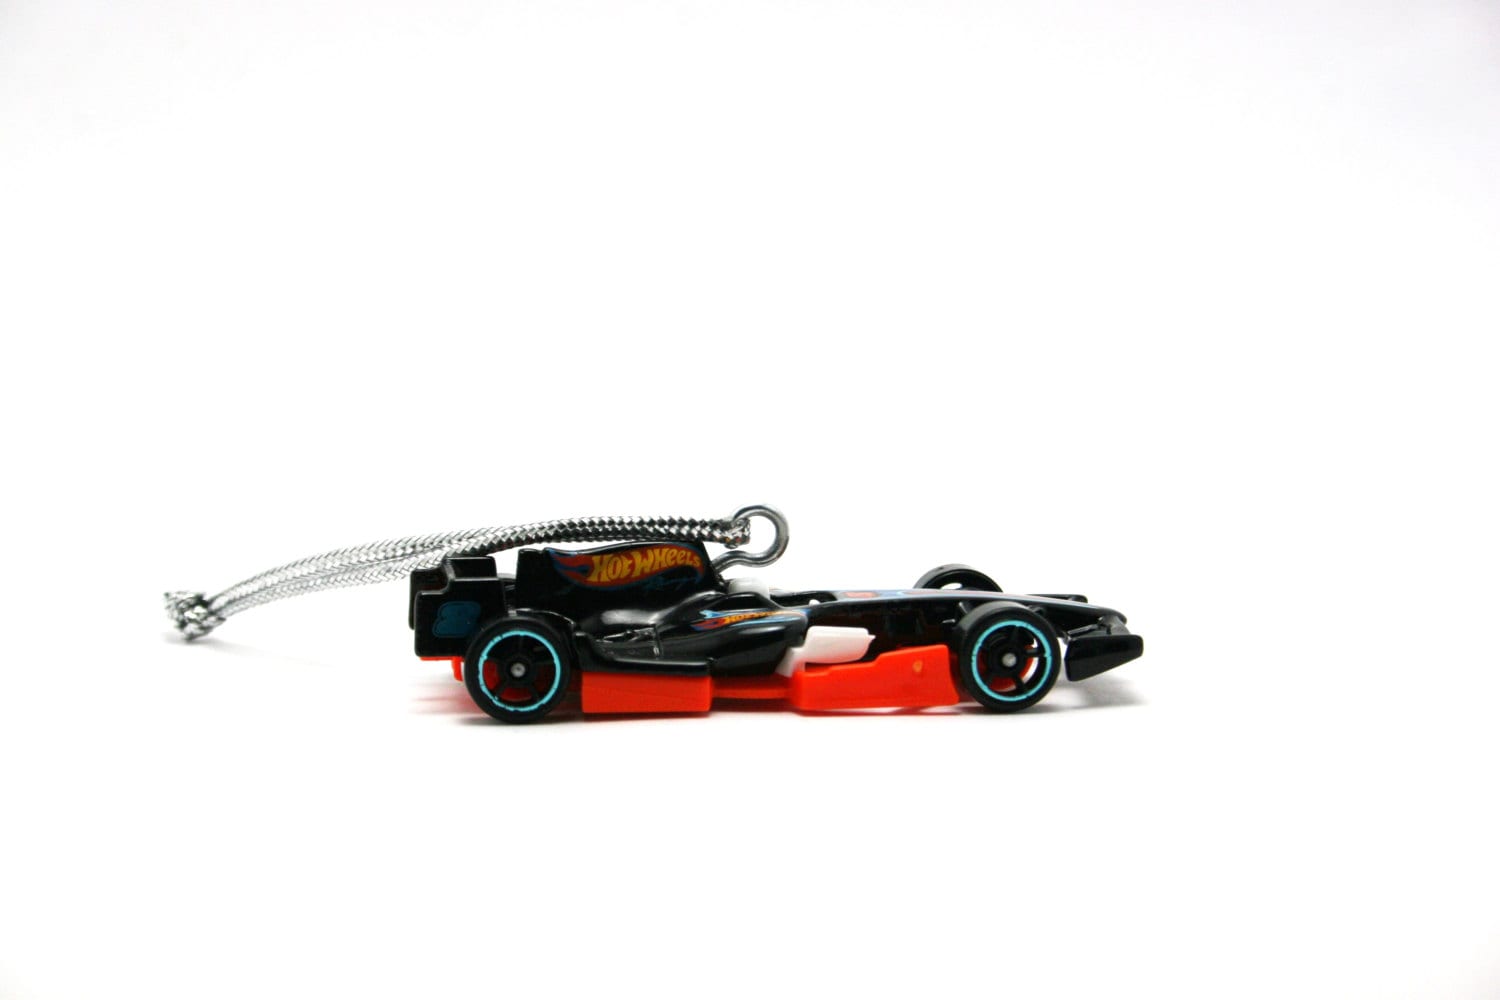 Formula One F1 Racer Hot Wheels Ornament by LuxoResale on Etsy